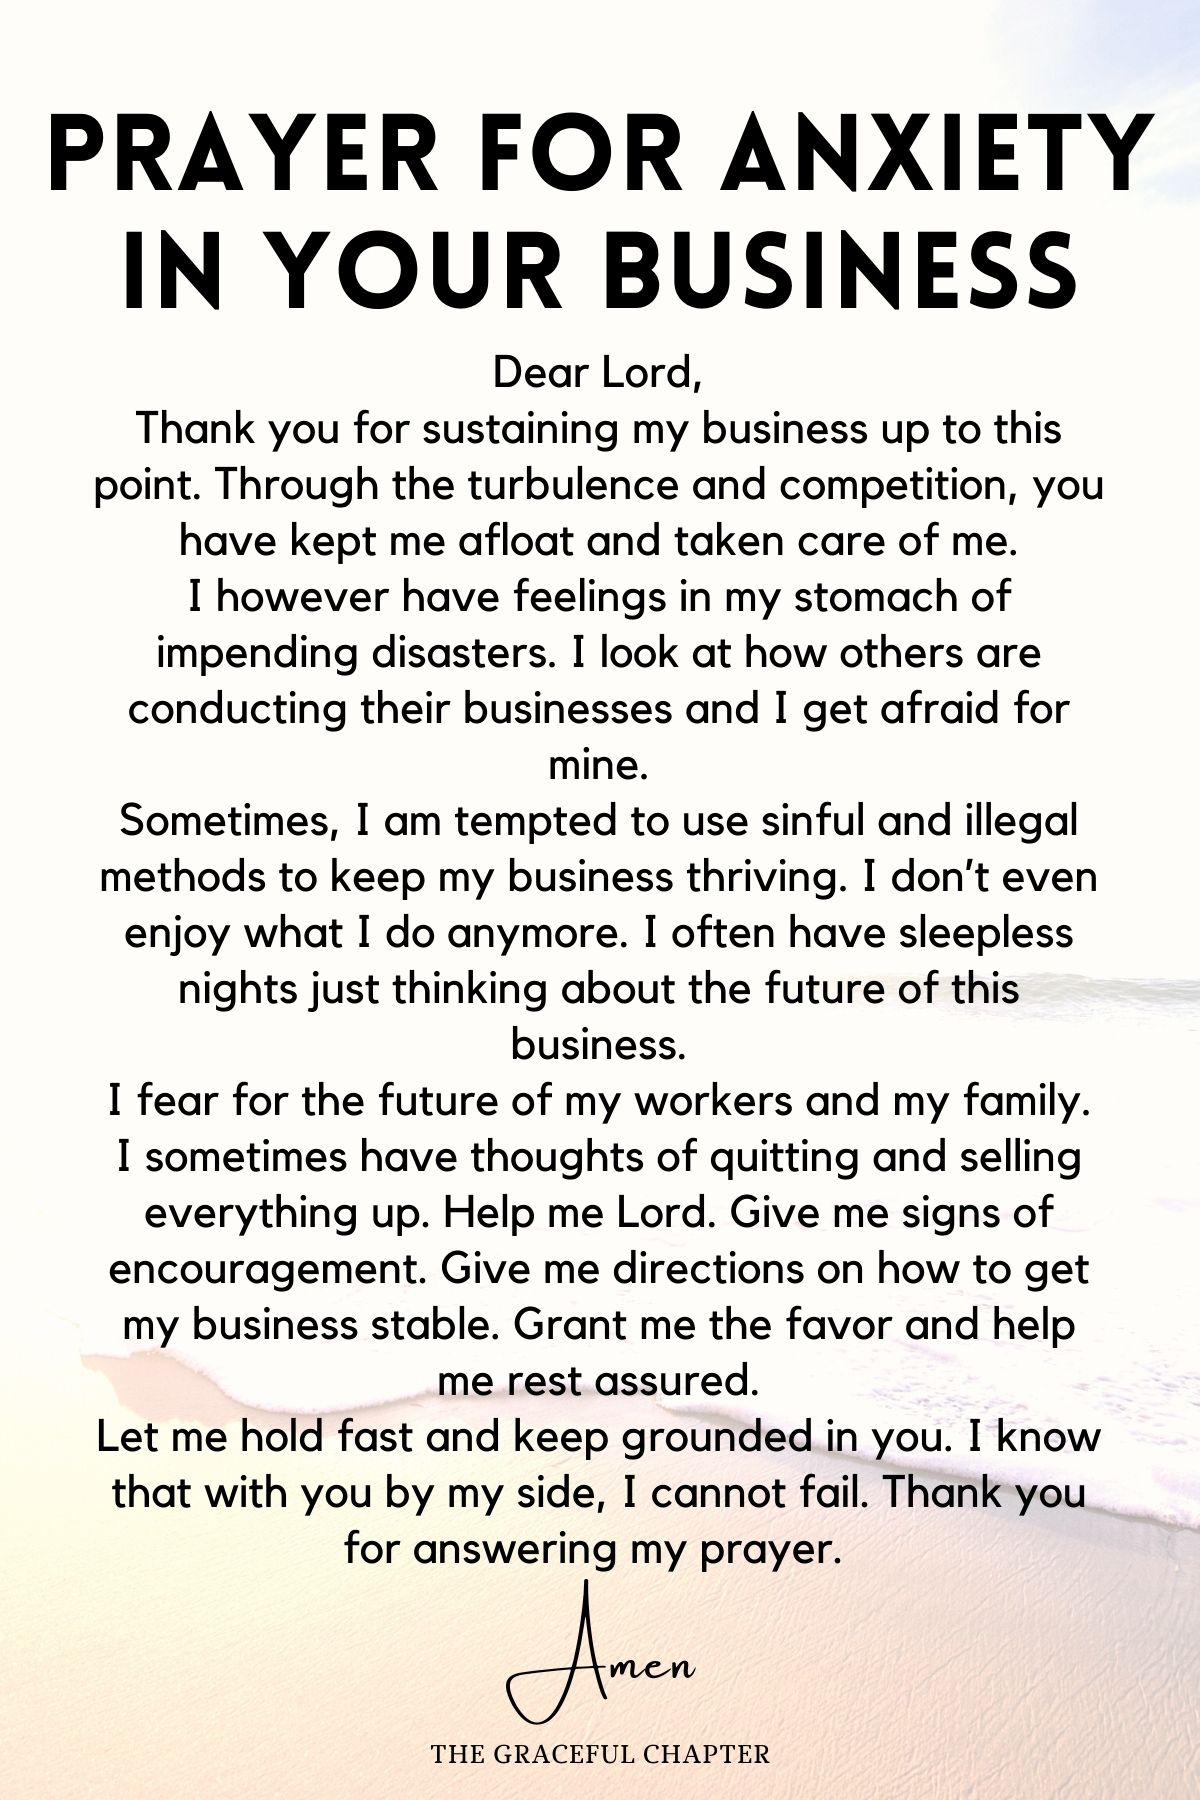 Prayer for Anxiety in your Business